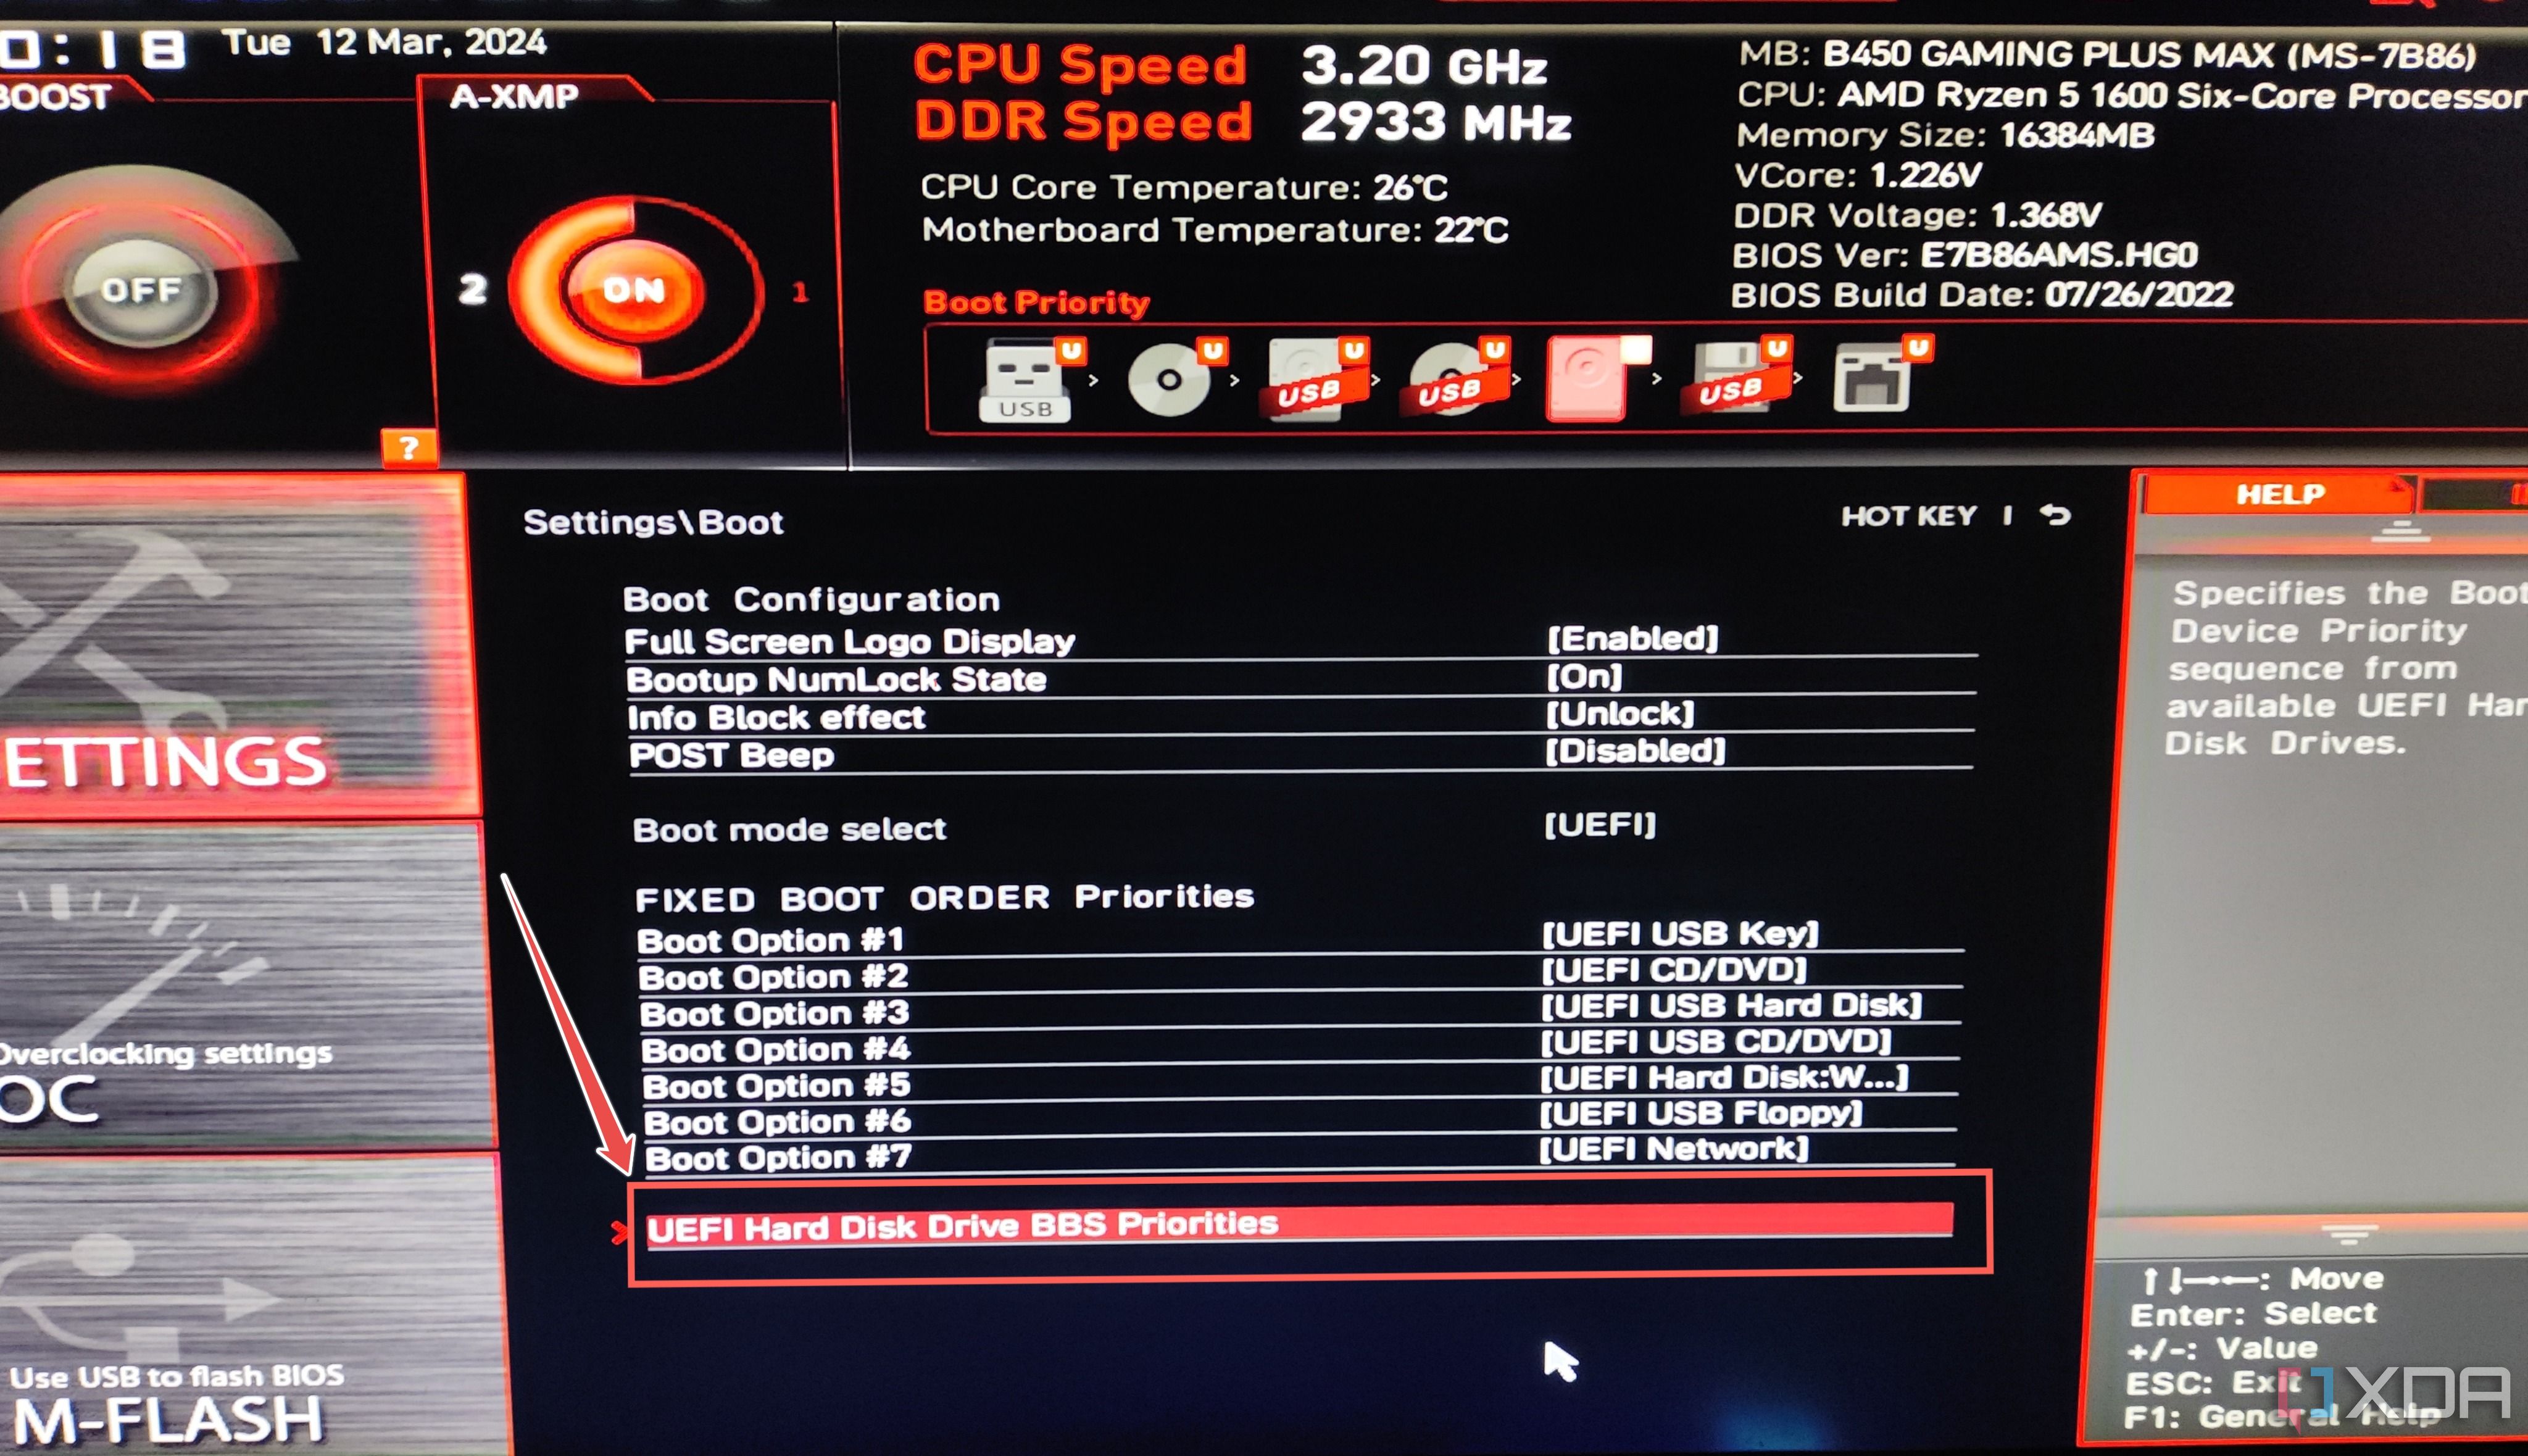 MSI BIOS with the BBS Priorities setting highlighted